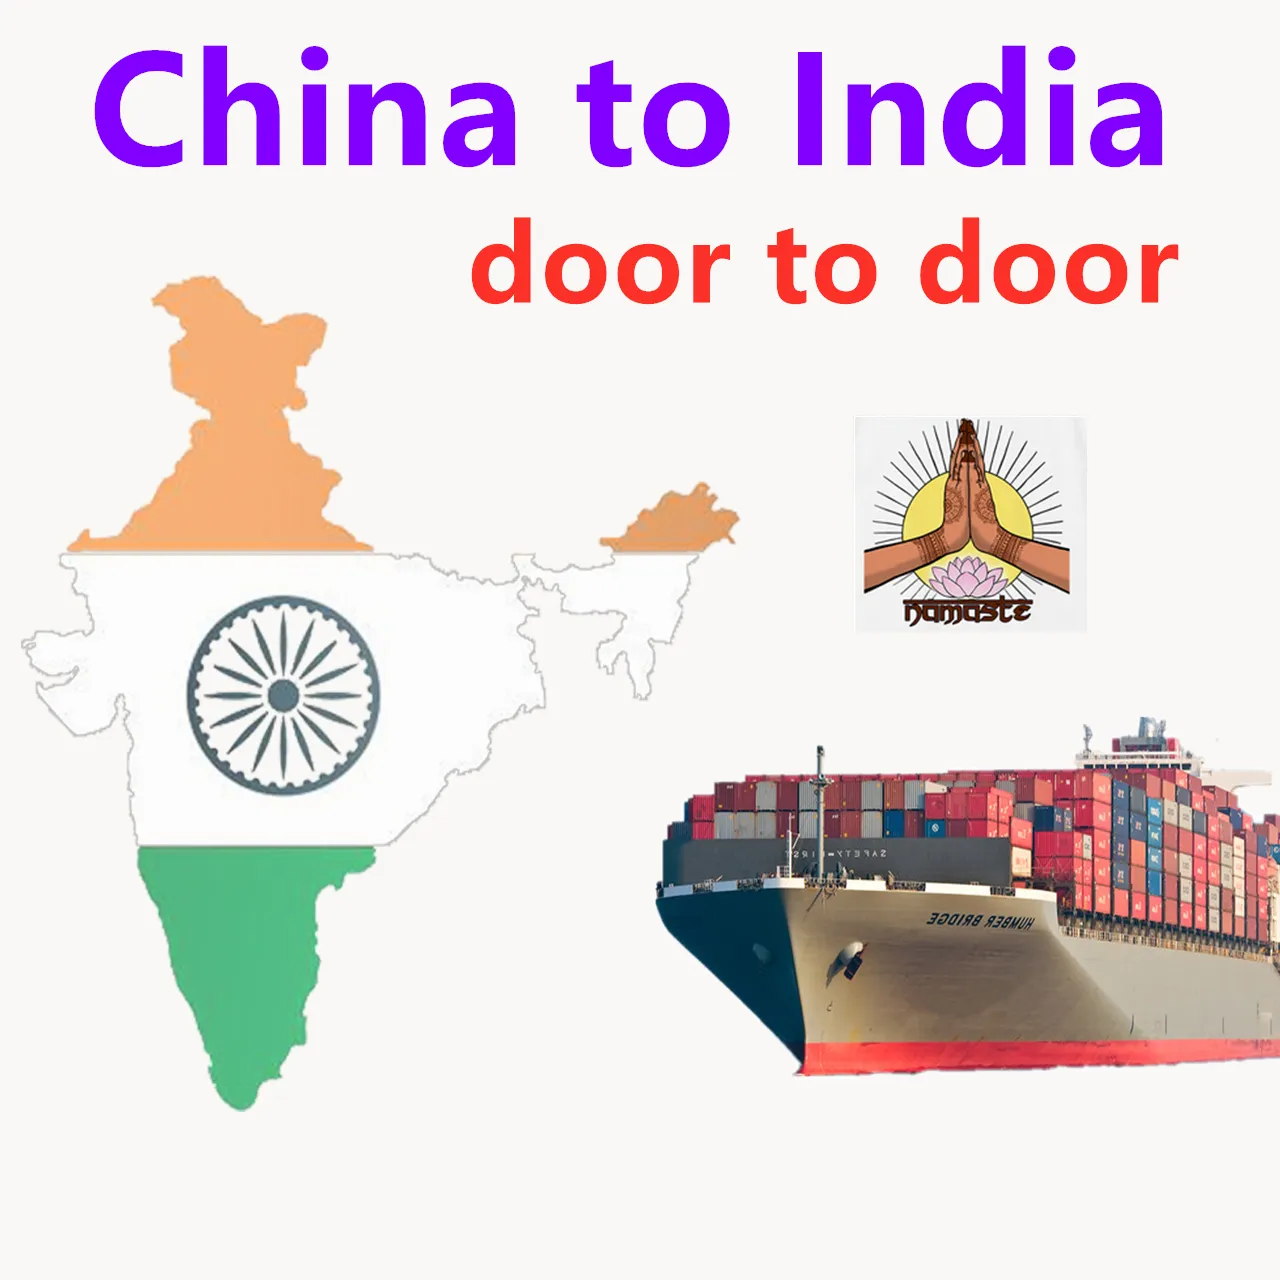 Cheapest Sea freight DDP shipping agent charges from China to India door to door with custom clearance service